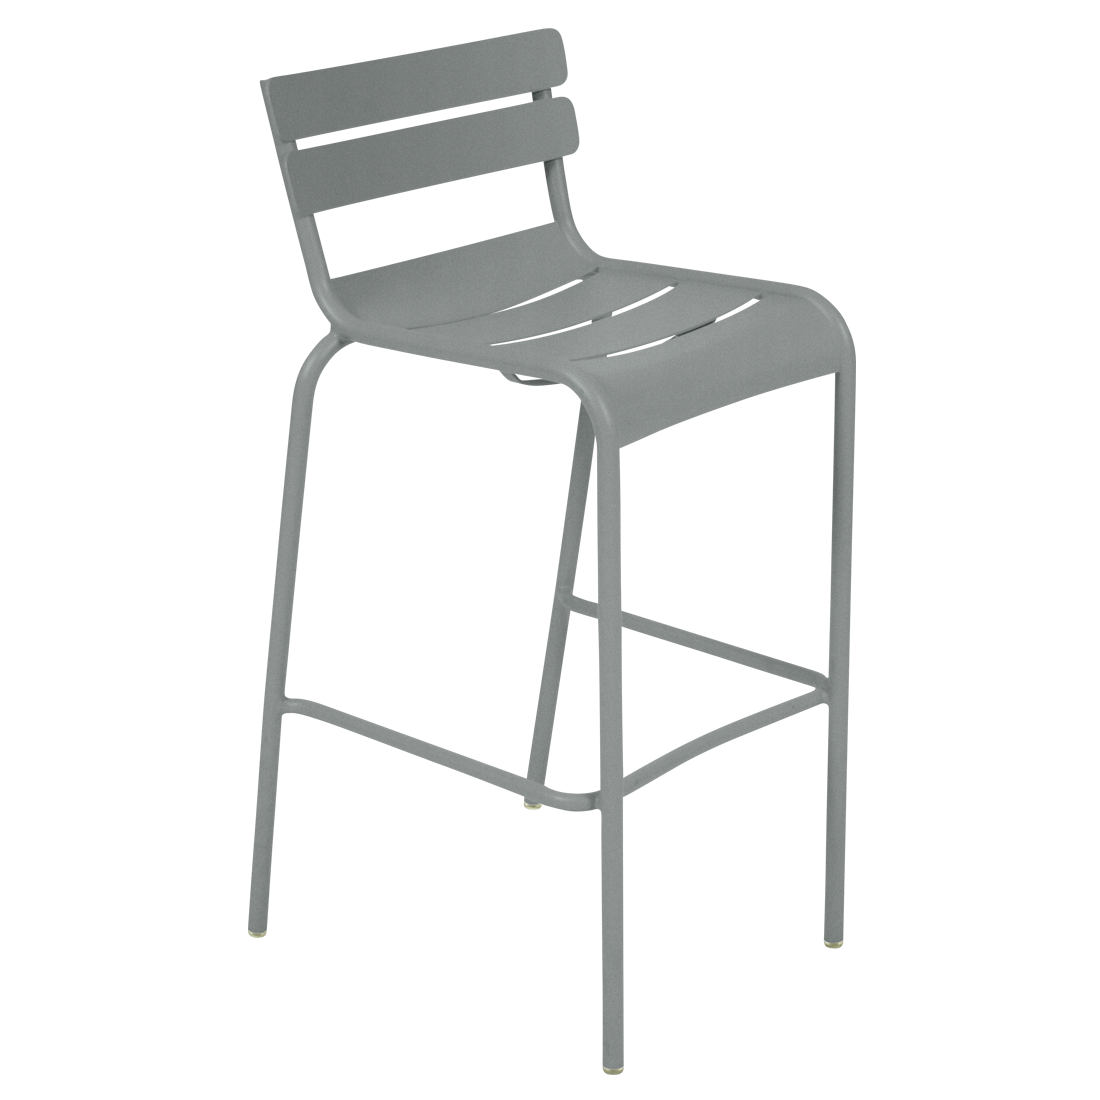 LUXEMBOURG BAR CHAIR W/BACK